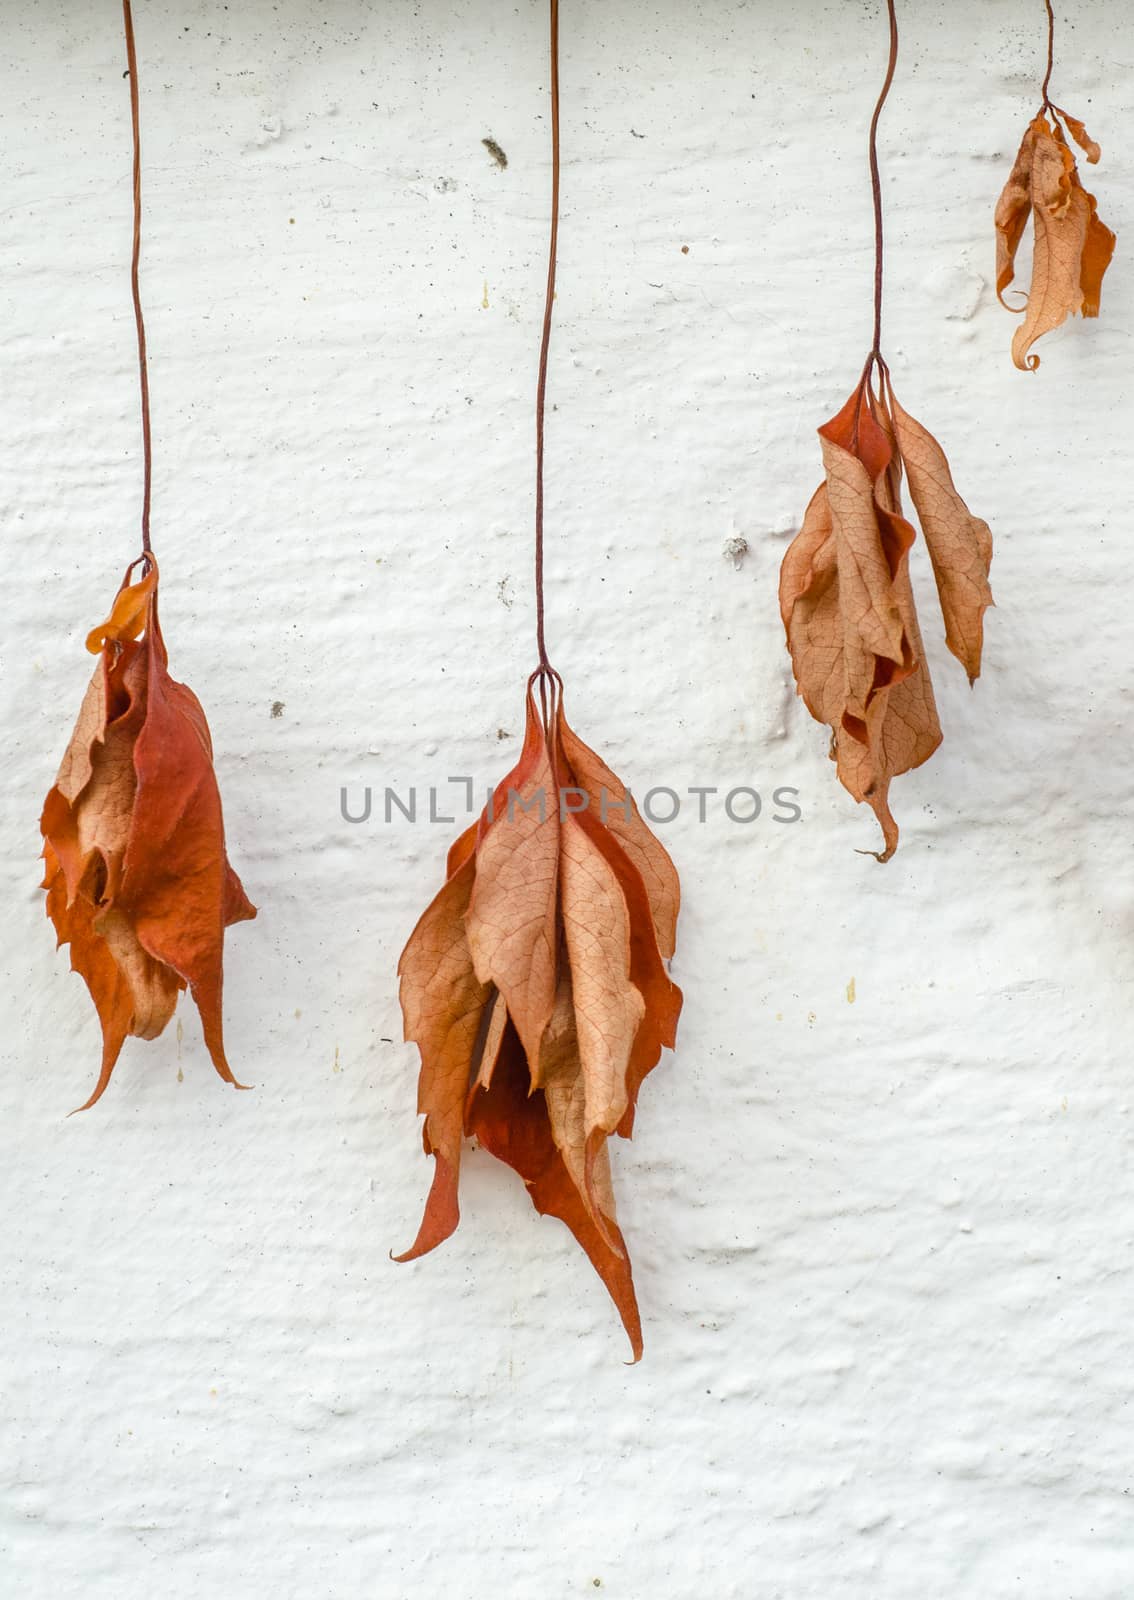 Conceptual Fall Image Of Dry And Withered Dead Leaves Hanging Against A White Wall